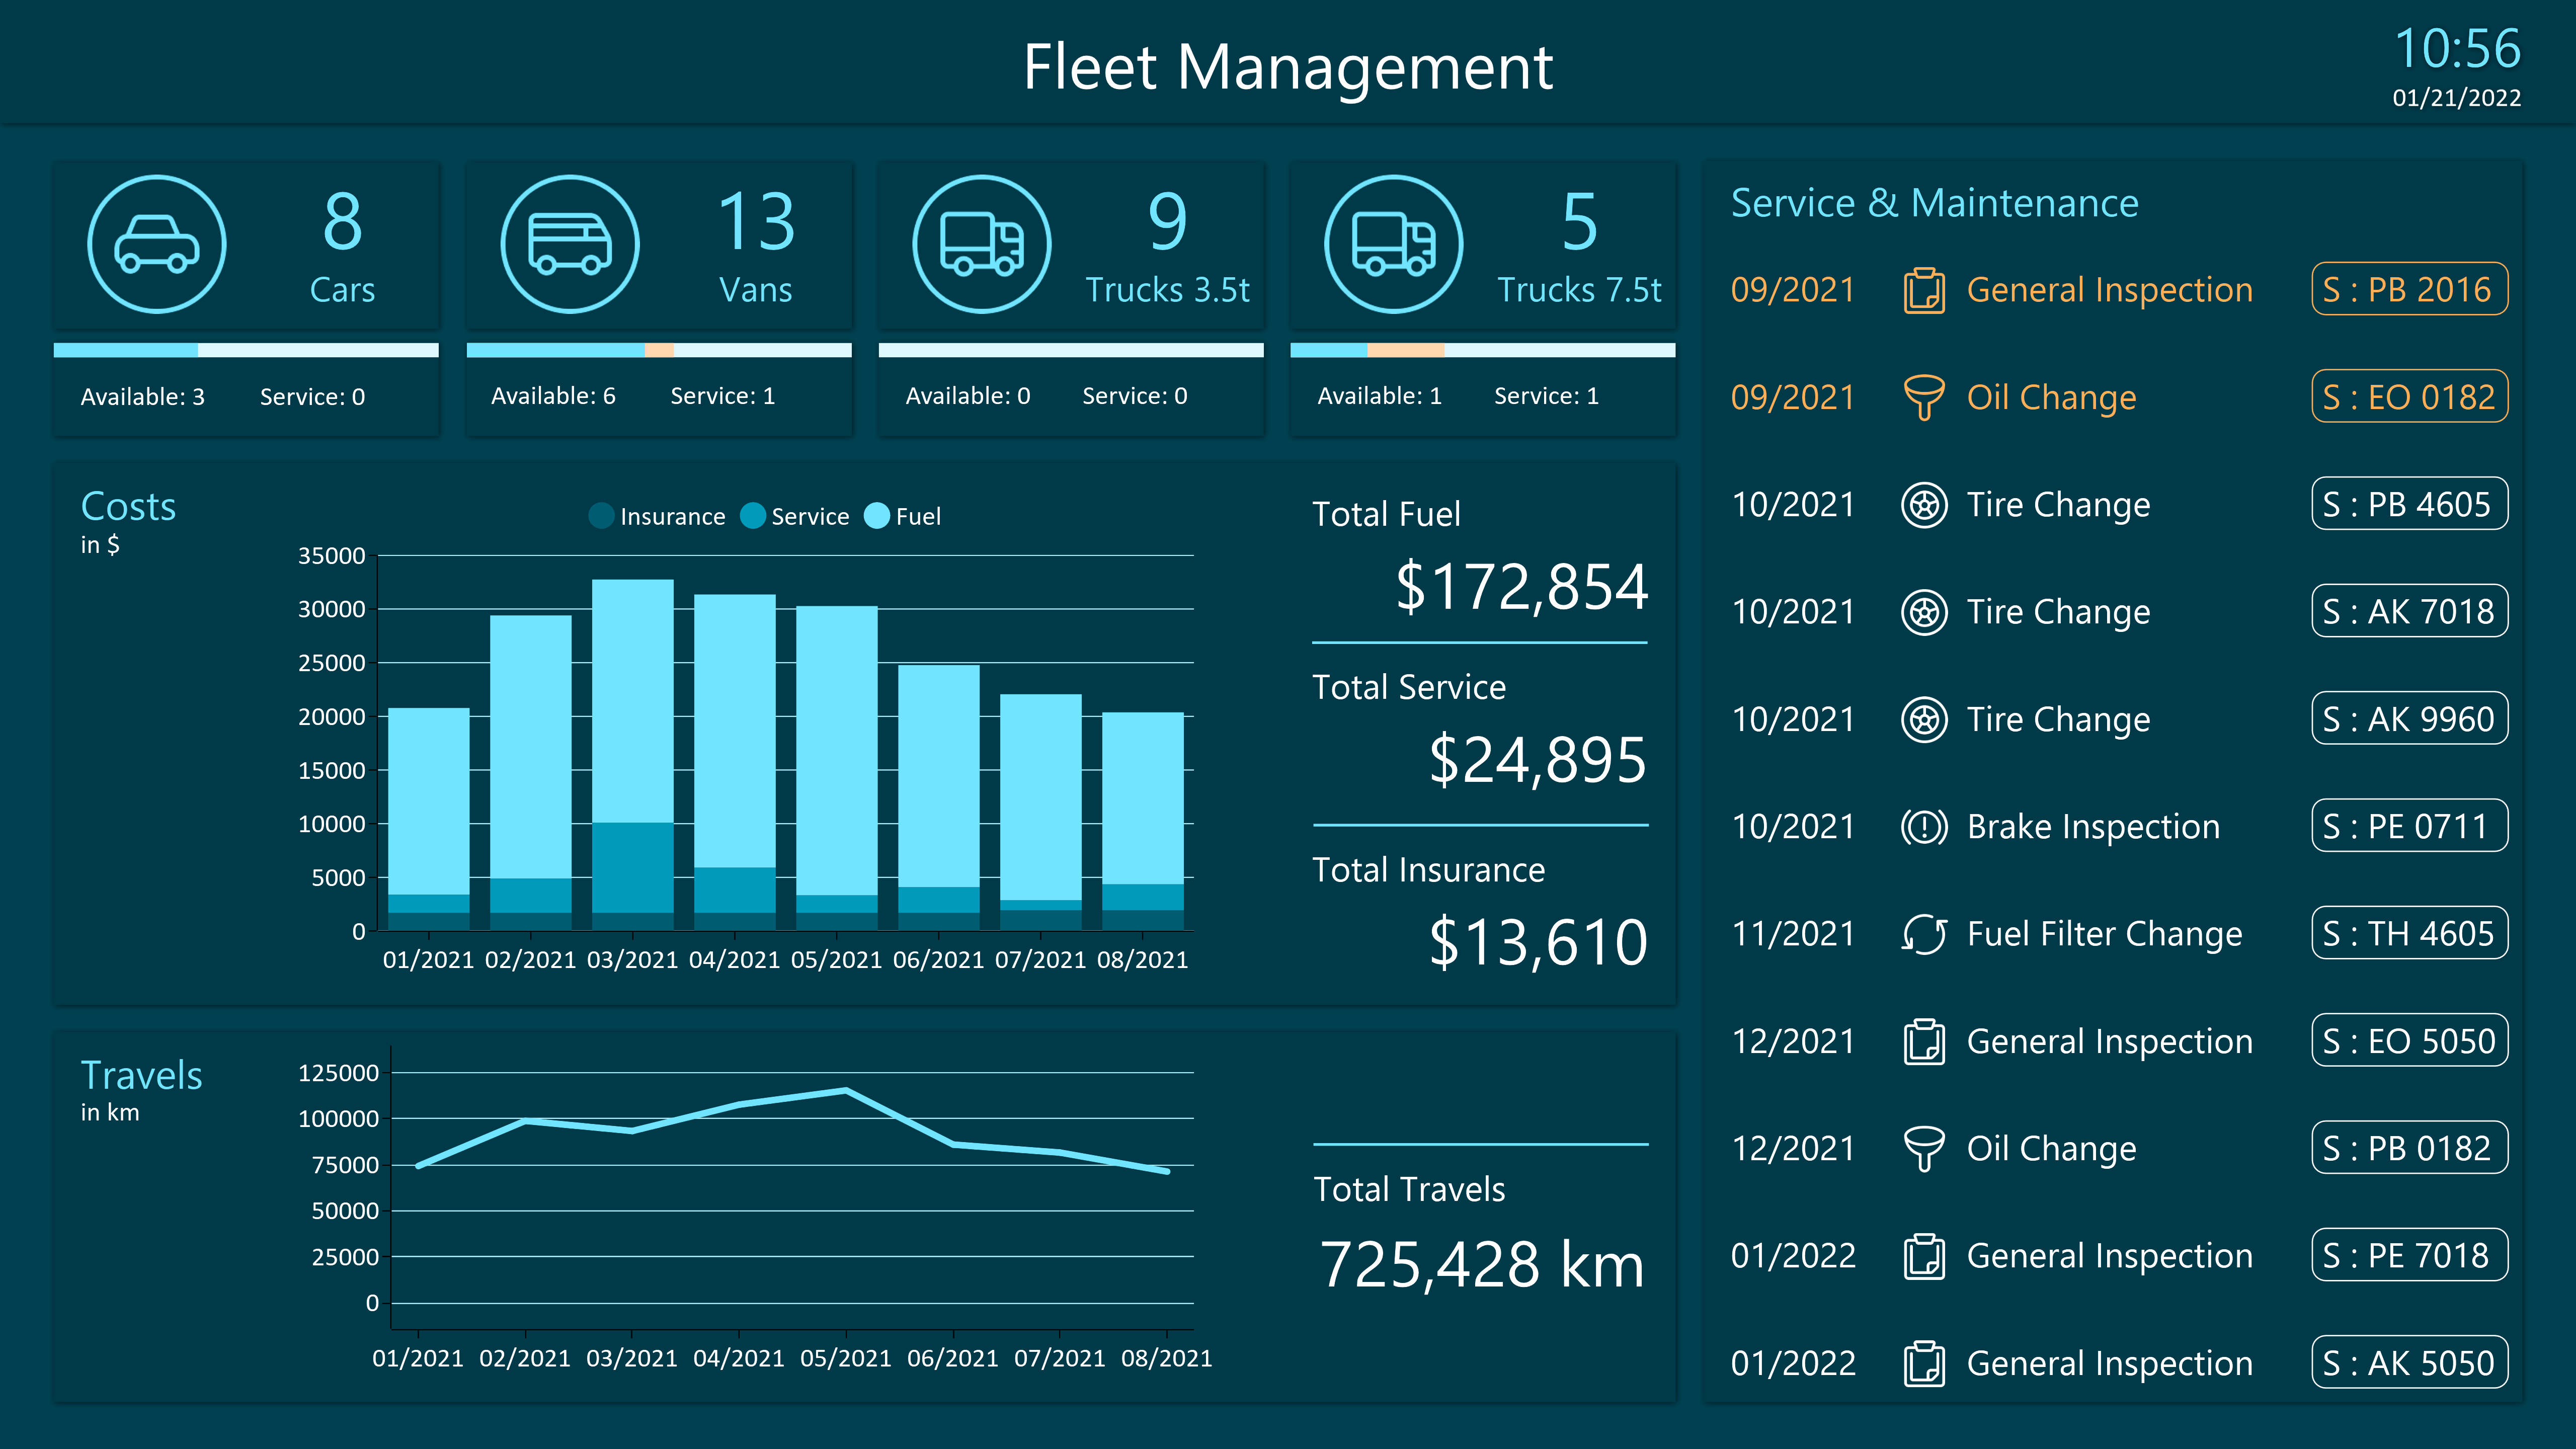 Fleet Management Dashboard for realtime information about your fleet